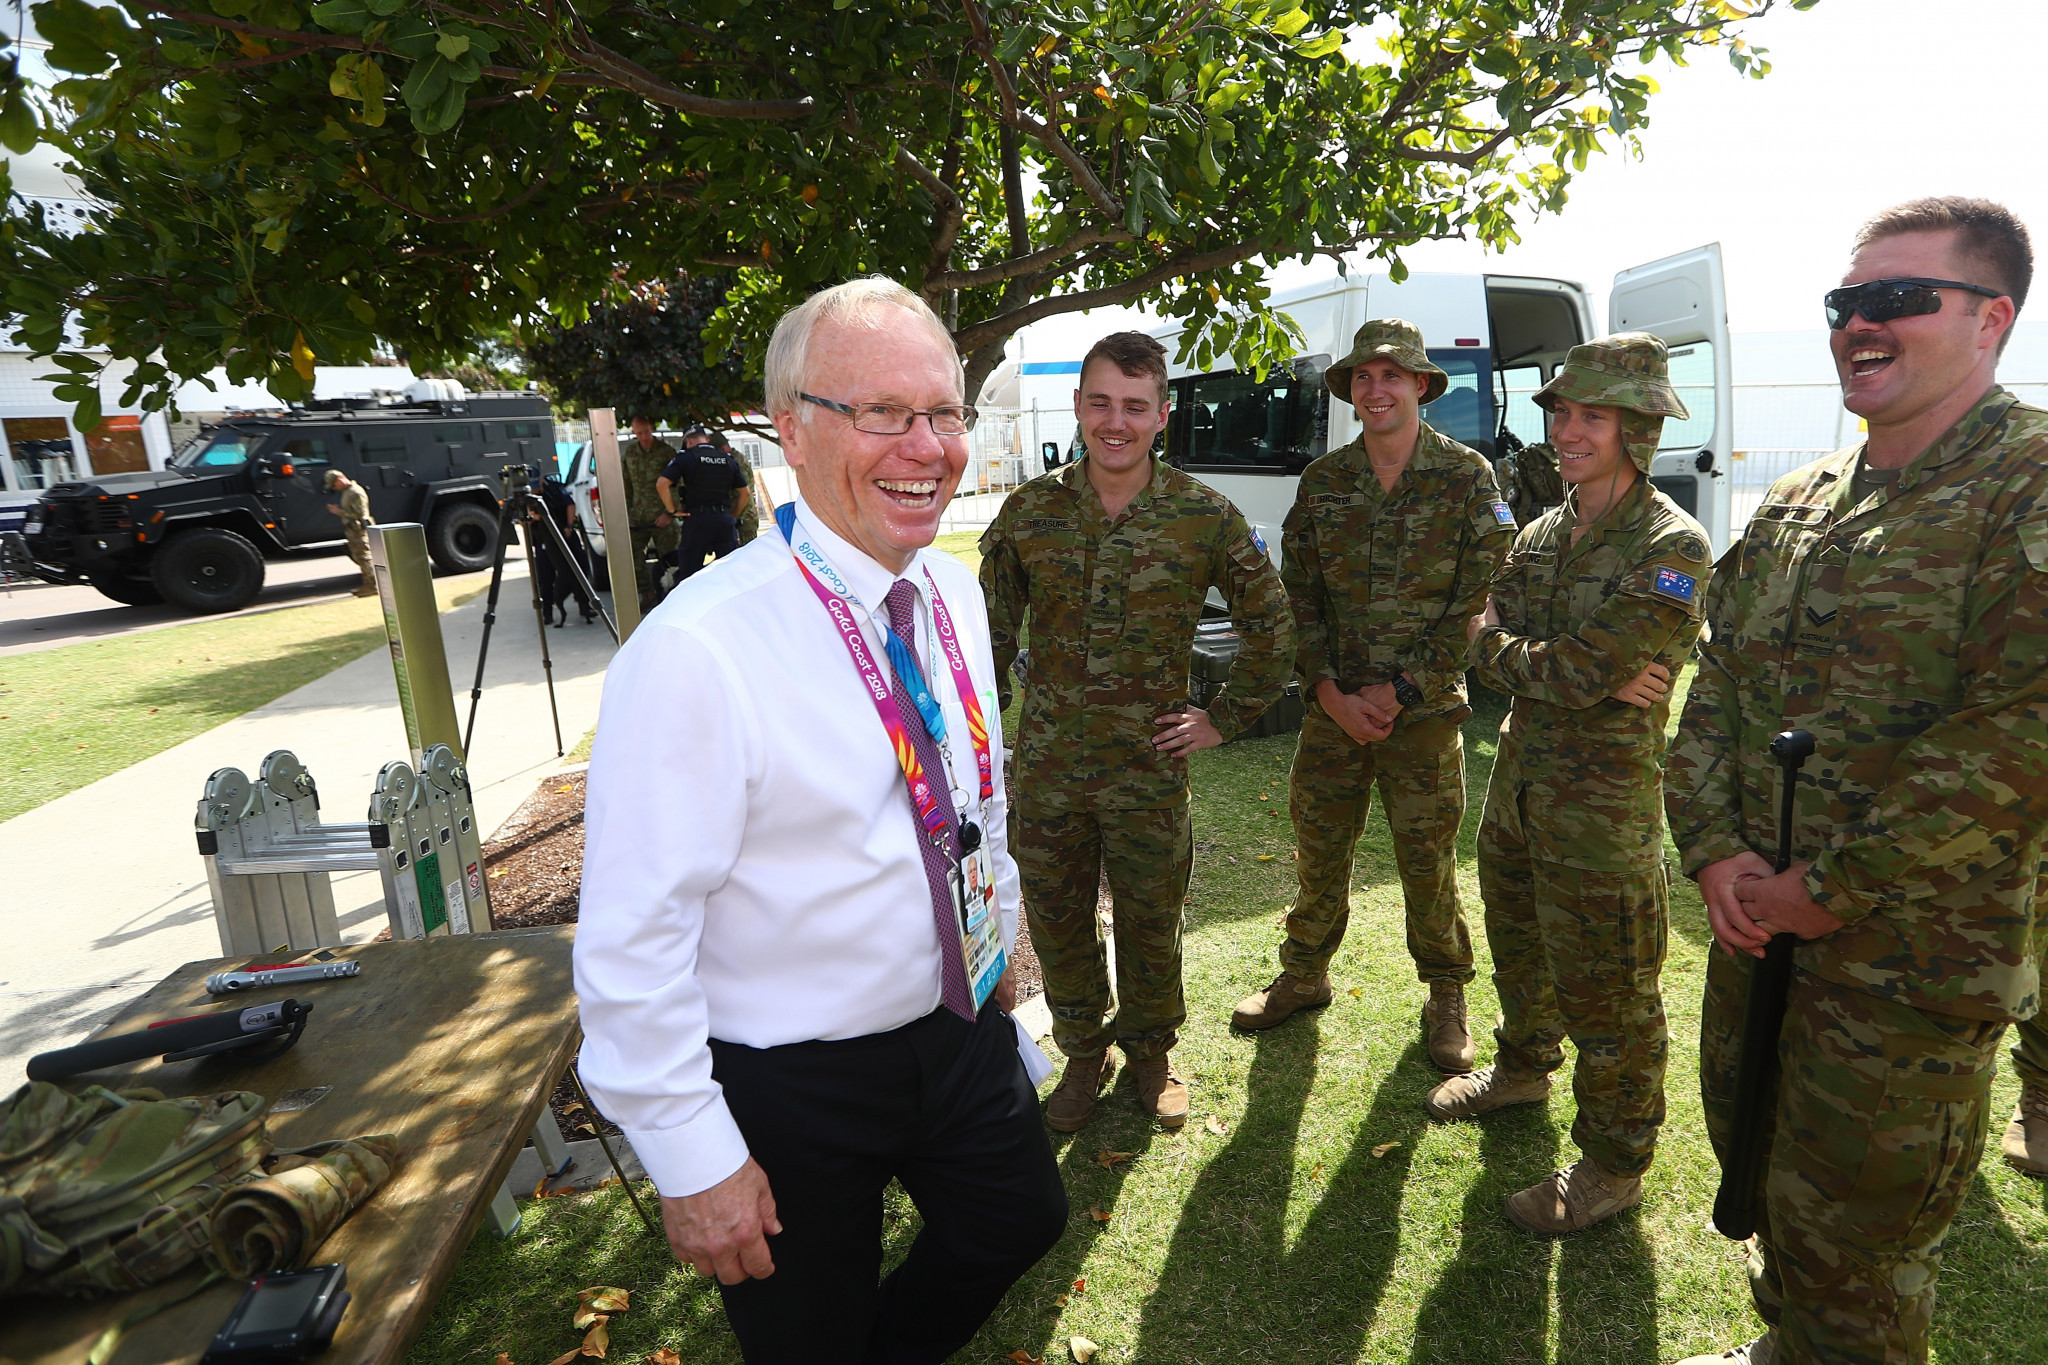 Gold Coast 2018 chairman Peter Beattie admiited he asked the Commonwealth Games Federation to change their protocol to allow the Premier Annastacia Palaszczuk to speak at the Opening Ceremony ©Getty Images